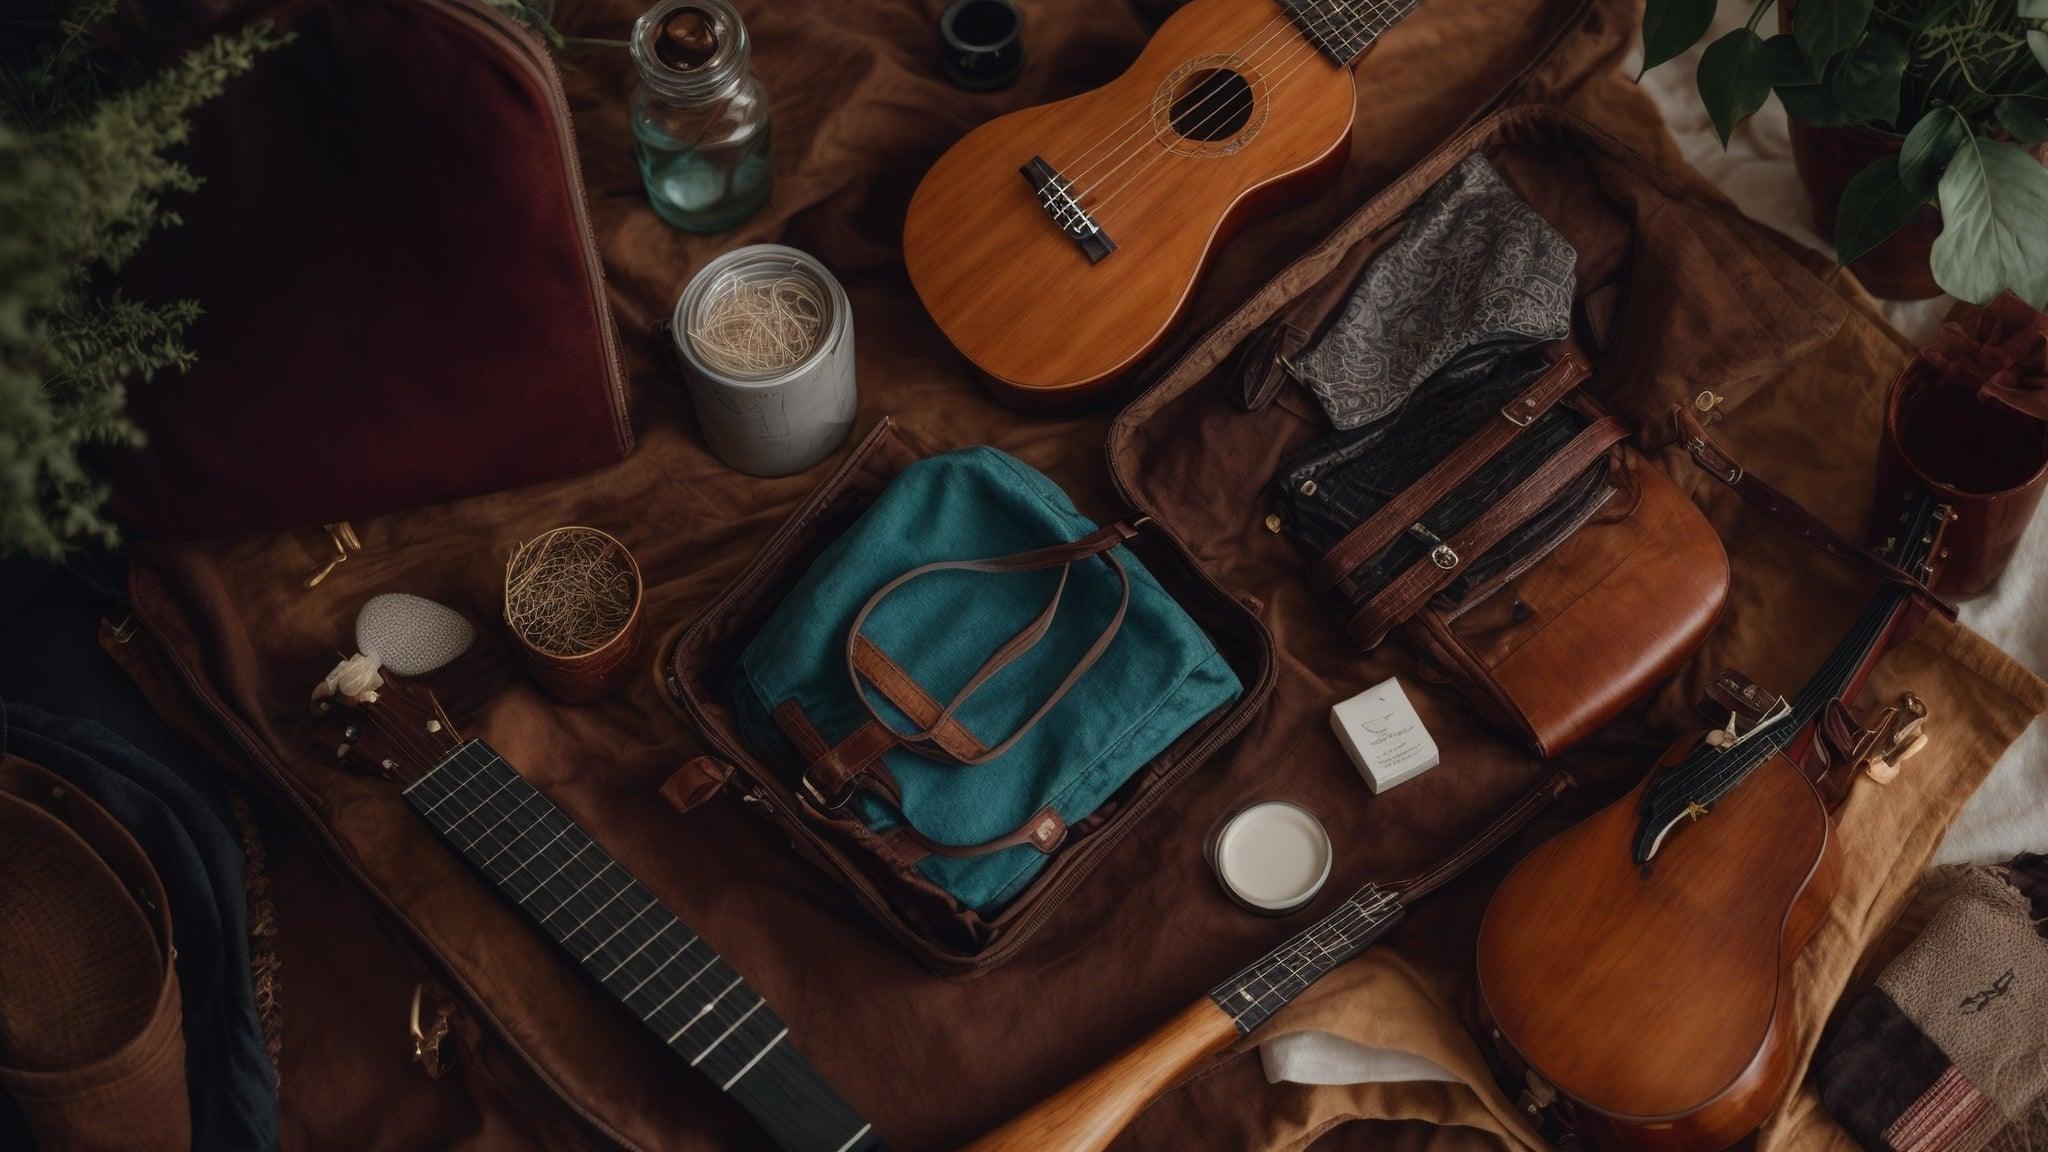 Ukulele Care and Maintenance: Keeping Your Uke in Optimal Playing Condition by Muso's Stuff